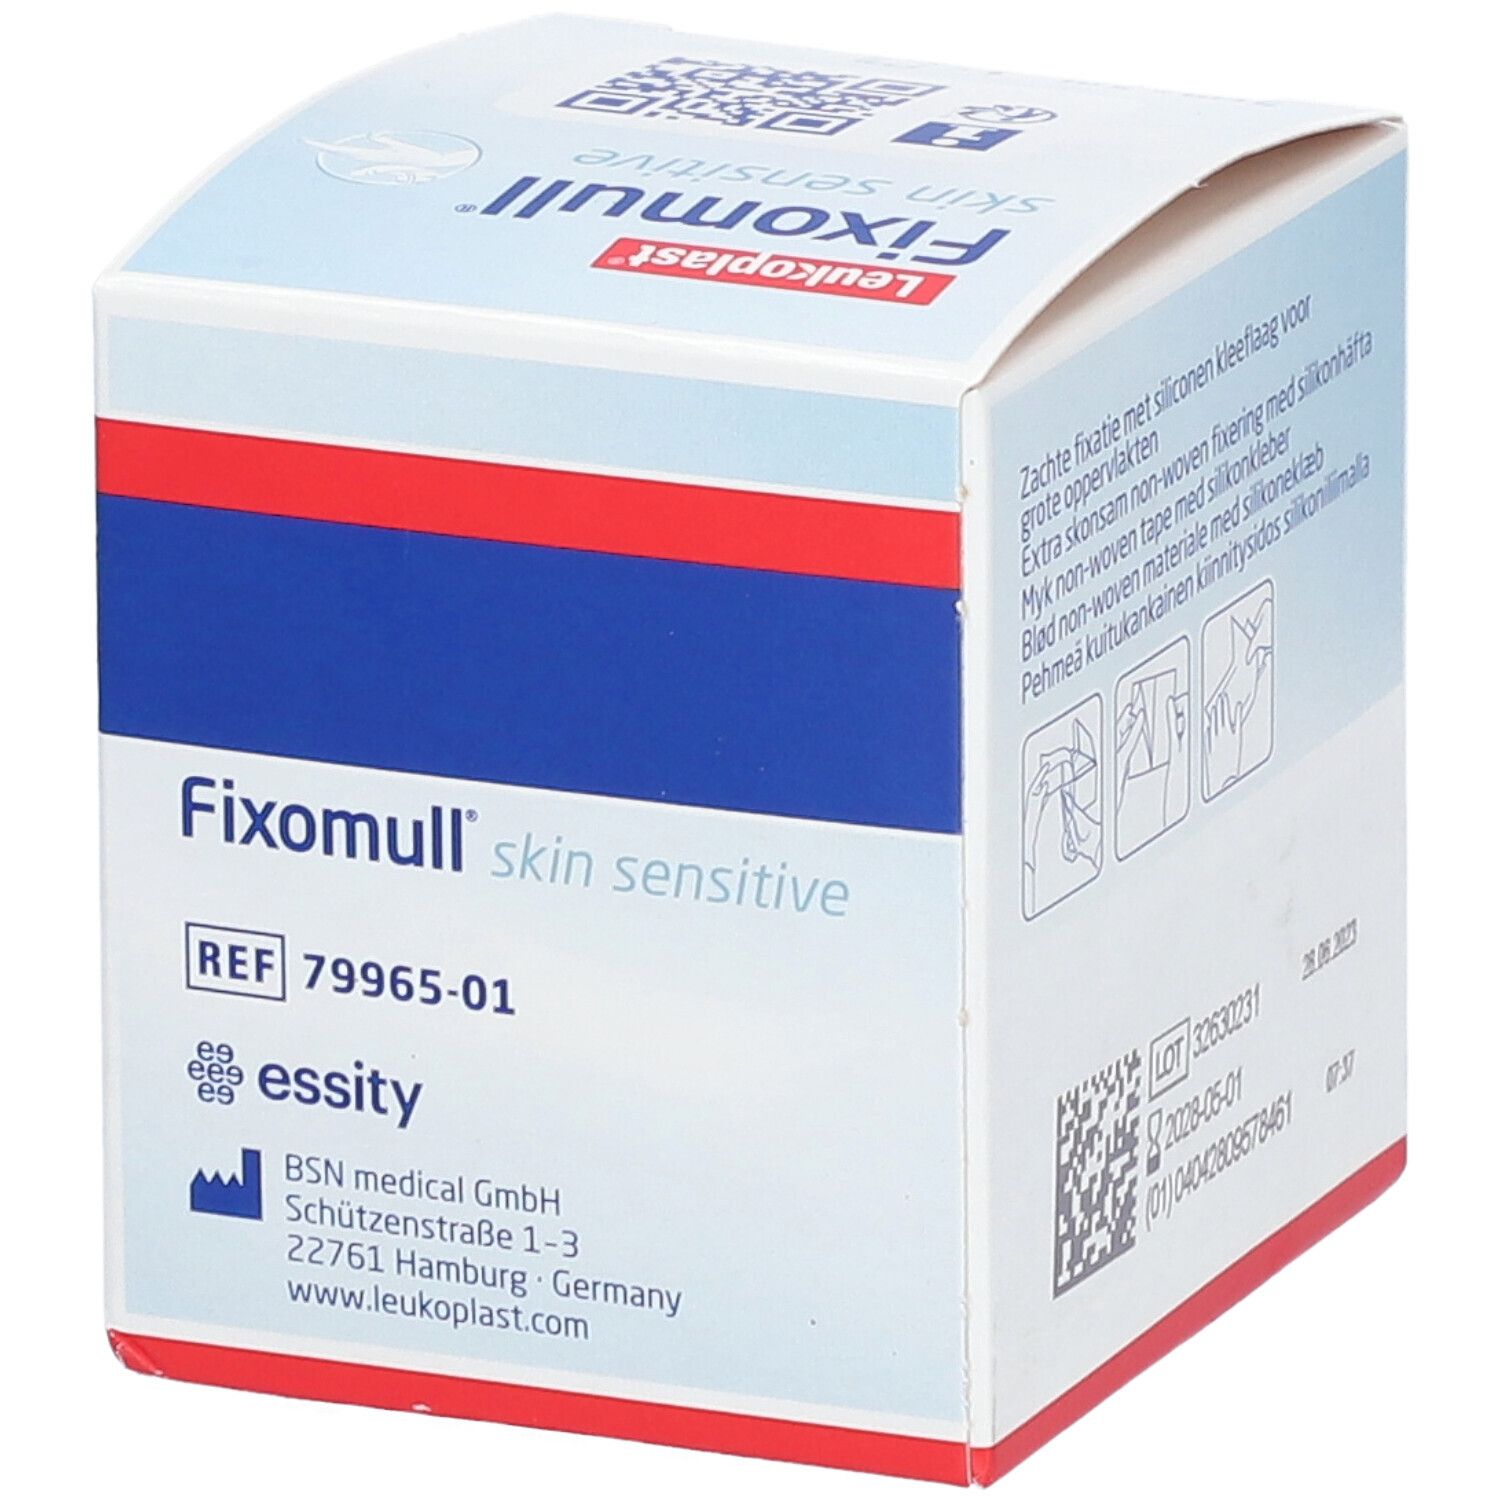 Fixomull® gentle touch 5 cm x 5 m